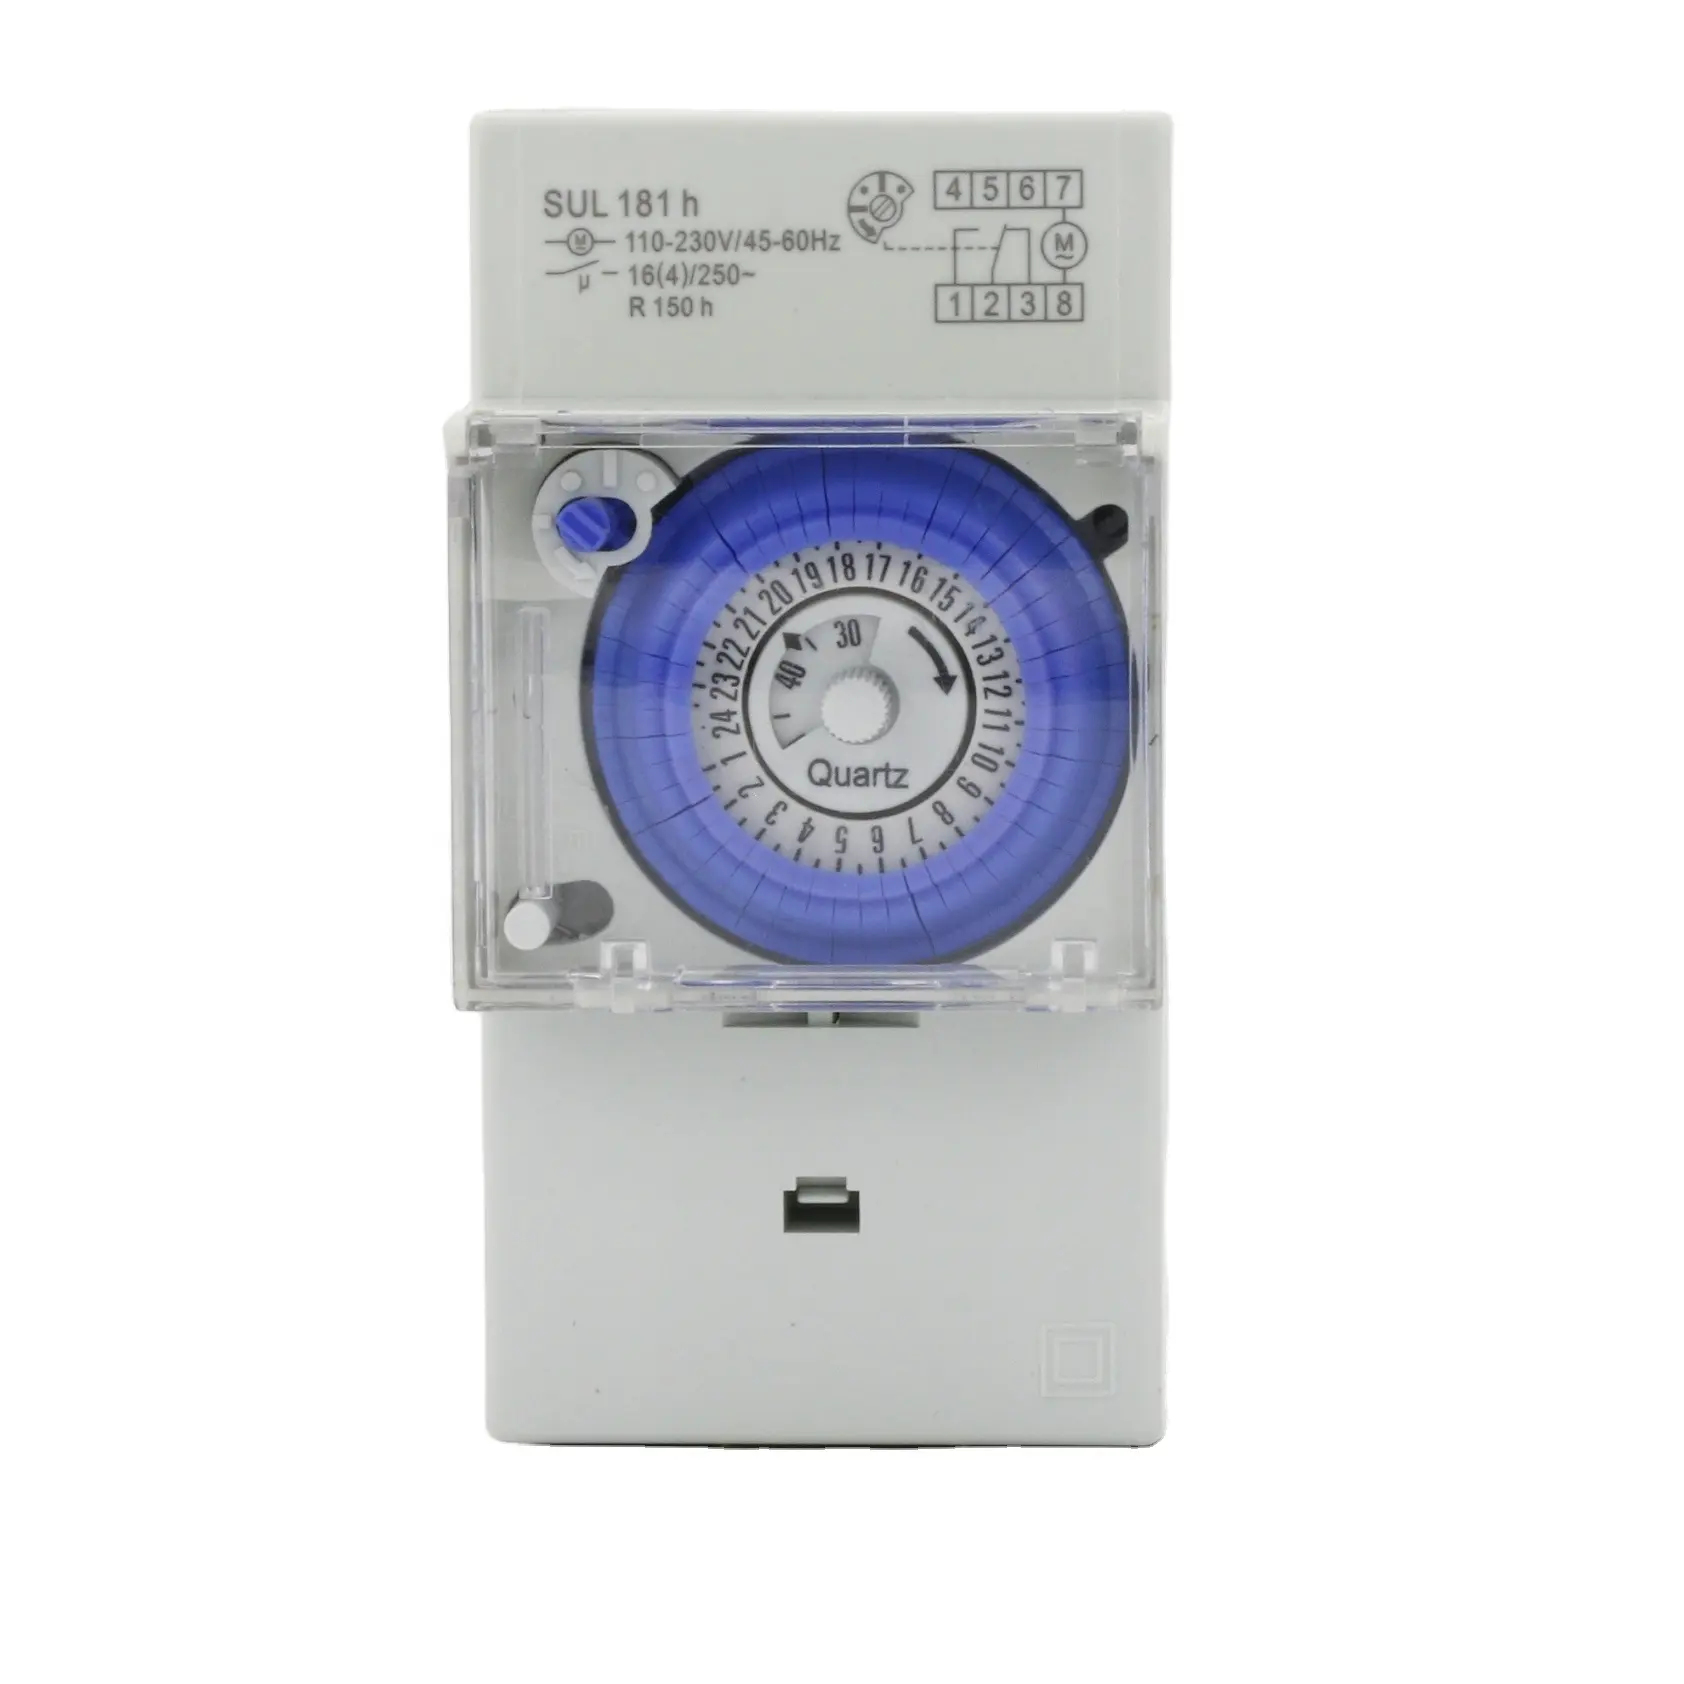 24h SUL181h Mechanical Electrical Time Timers Switch 220V volt 3 phase timer switch relay